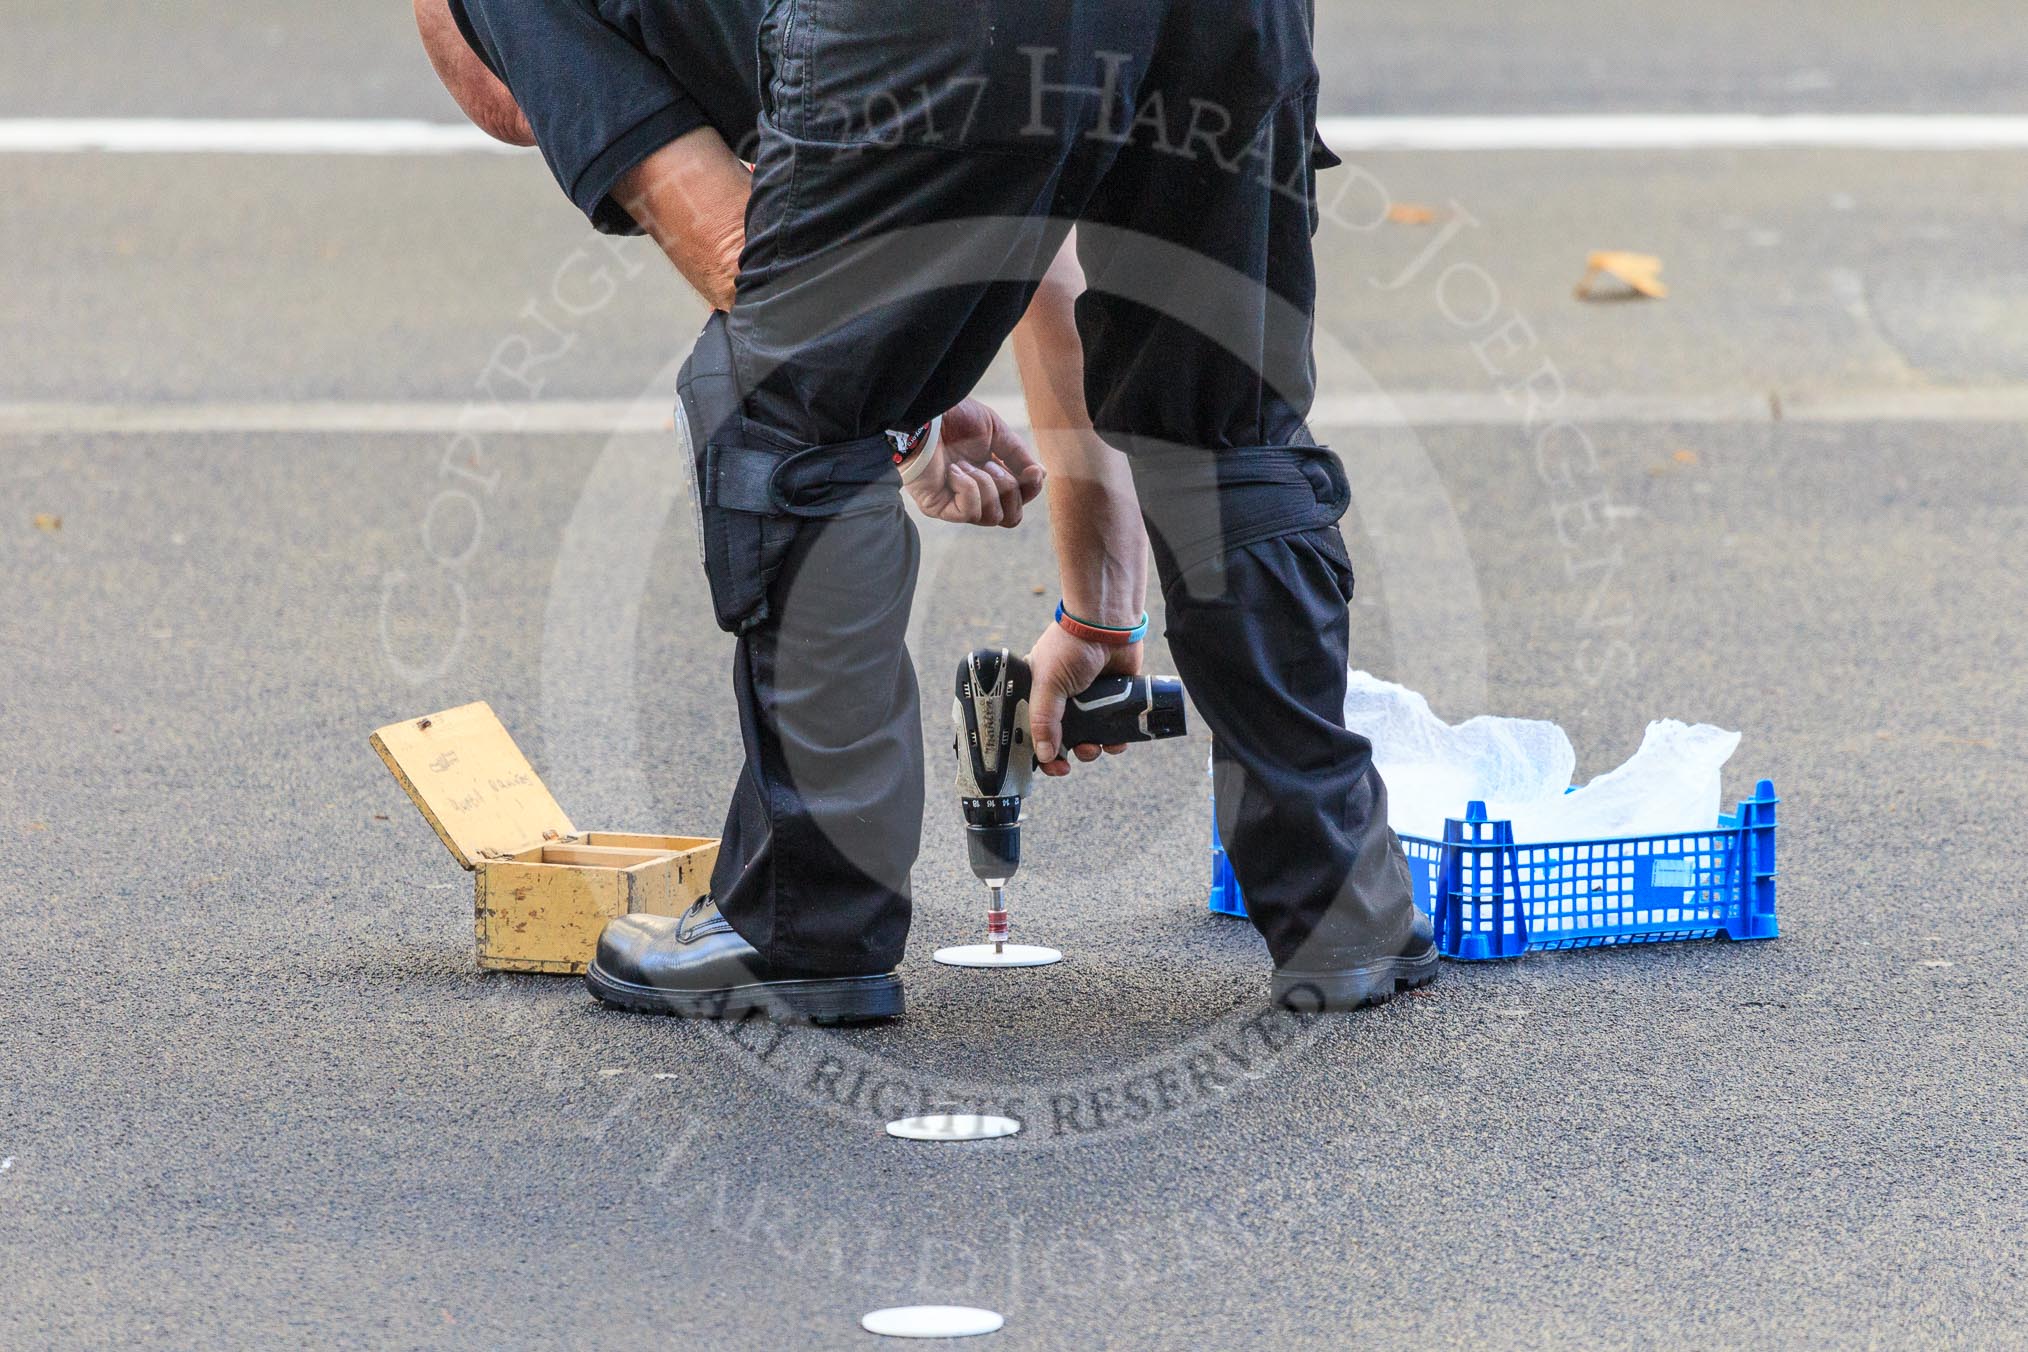 An Foreign and Commonwealth Office workman is screwing white discs onto the tarmac at Whitehall to mark the position of the members of the Royal Family and their Equerries before the  Remembrance Sunday Cenotaph Ceremony 2018 at Horse Guards Parade, Westminster, London, 11 November 2018, 08:54.